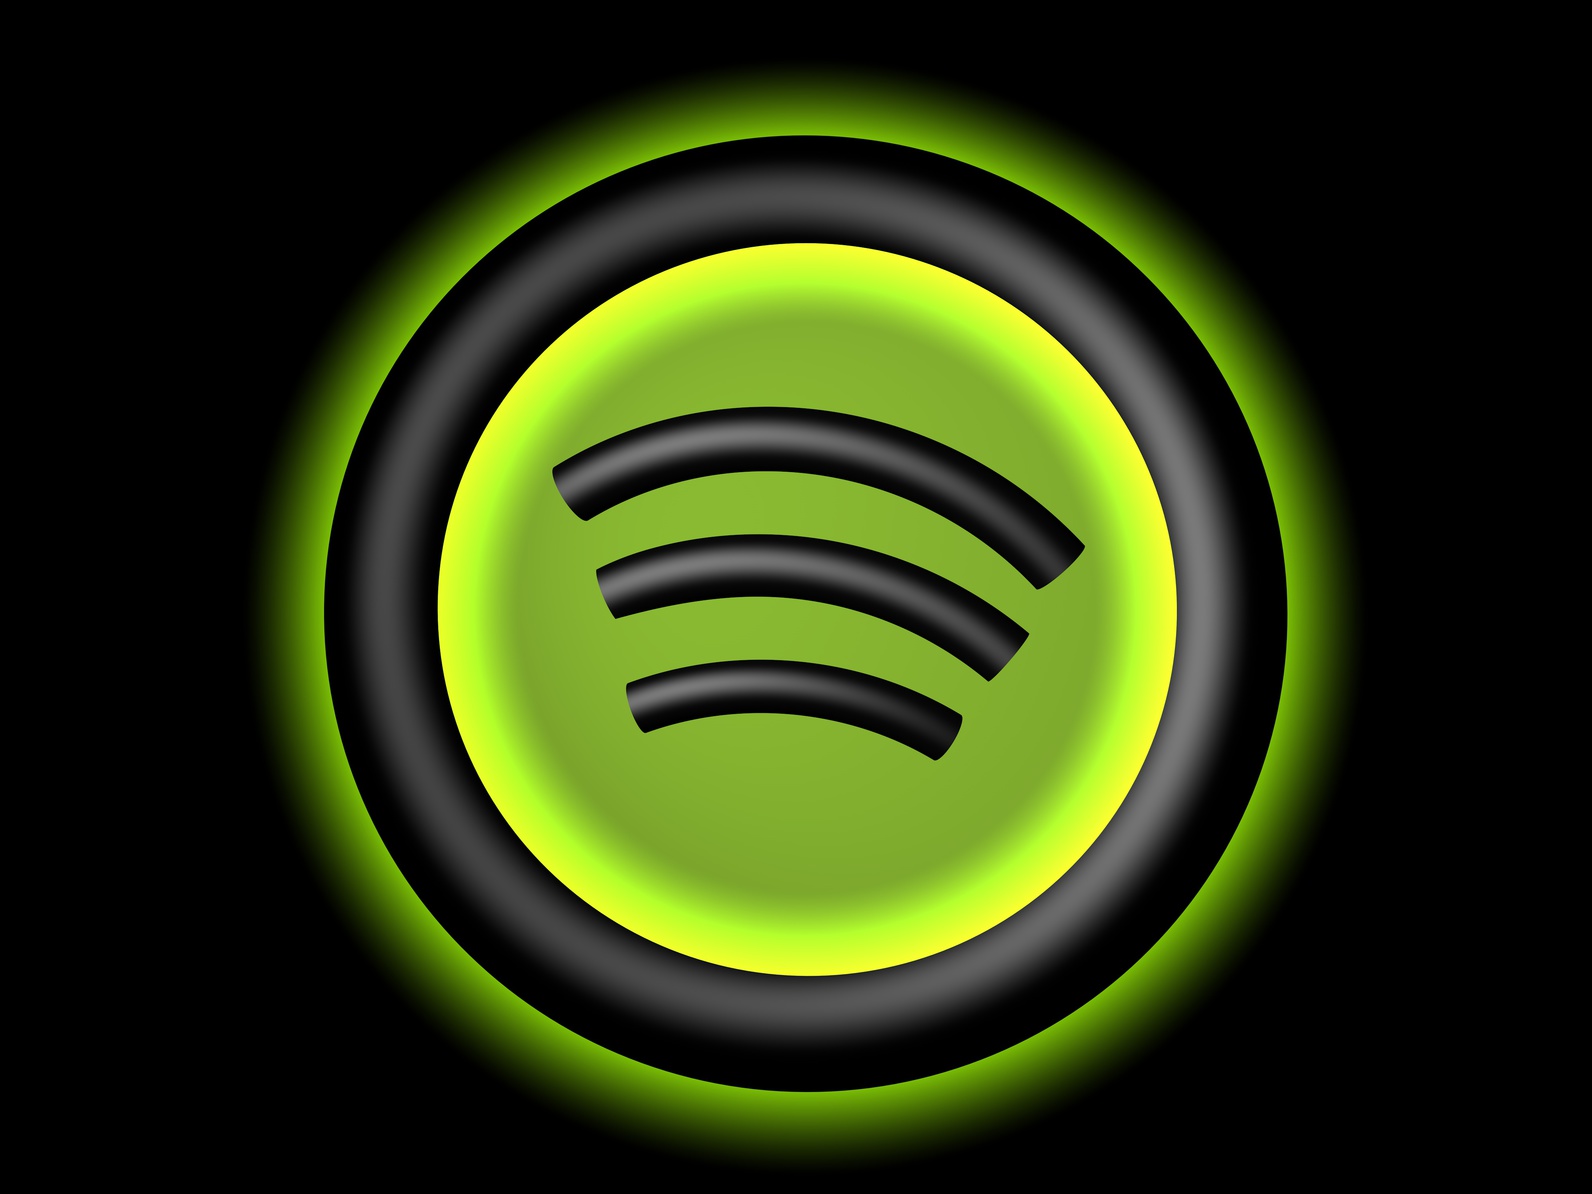 download the new version for android Spotify 1.2.17.834